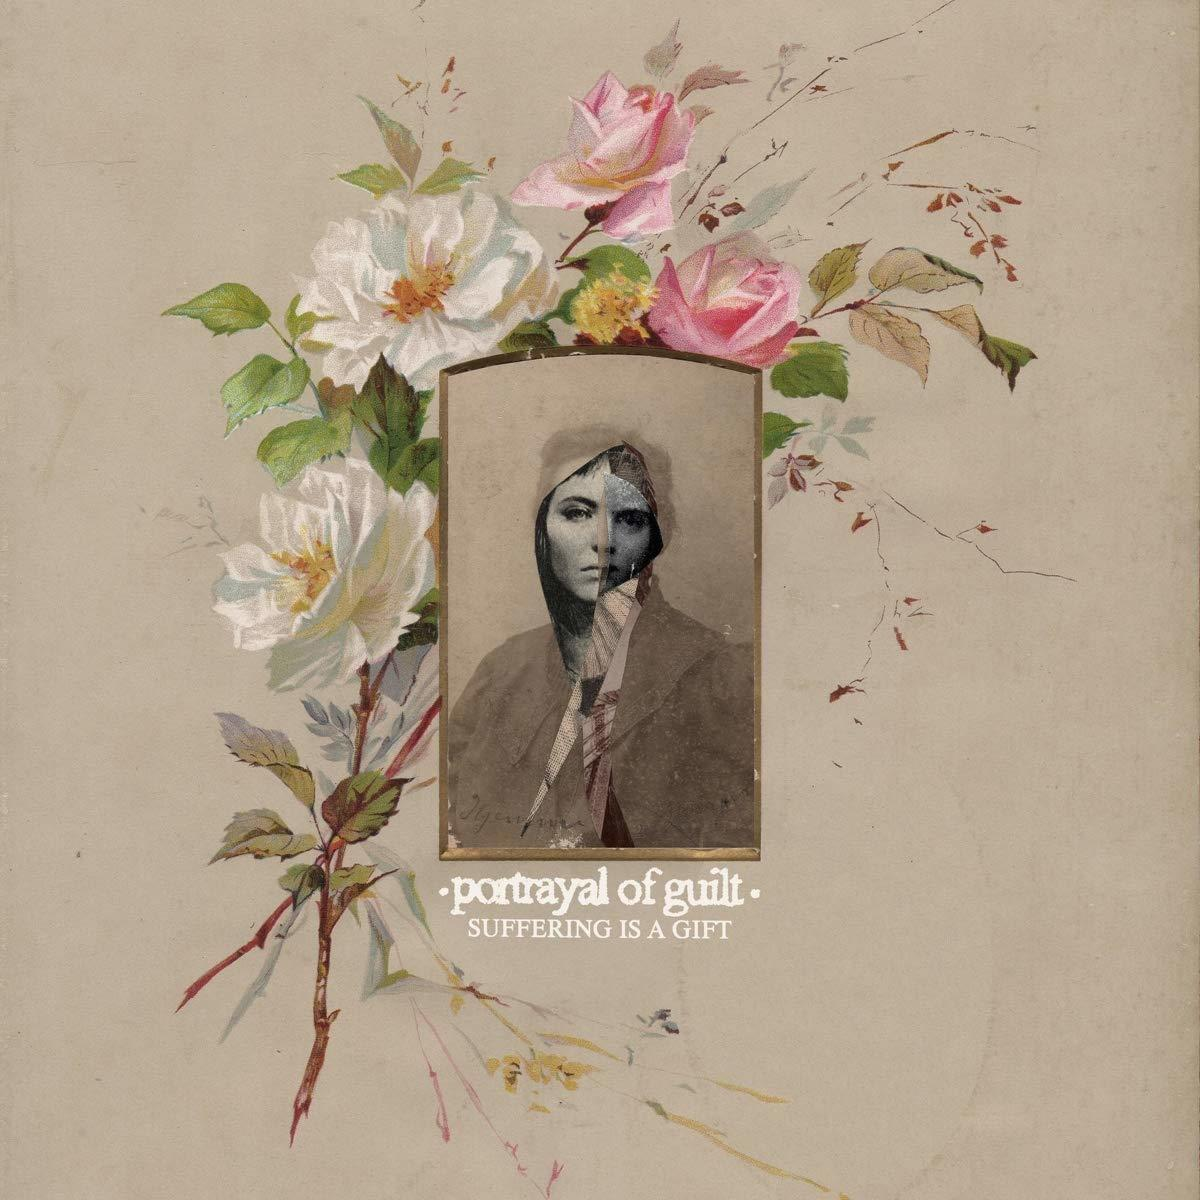 Portrayal Of Gift-EP- A Guilt (EP Is - (analog)) Suffering 